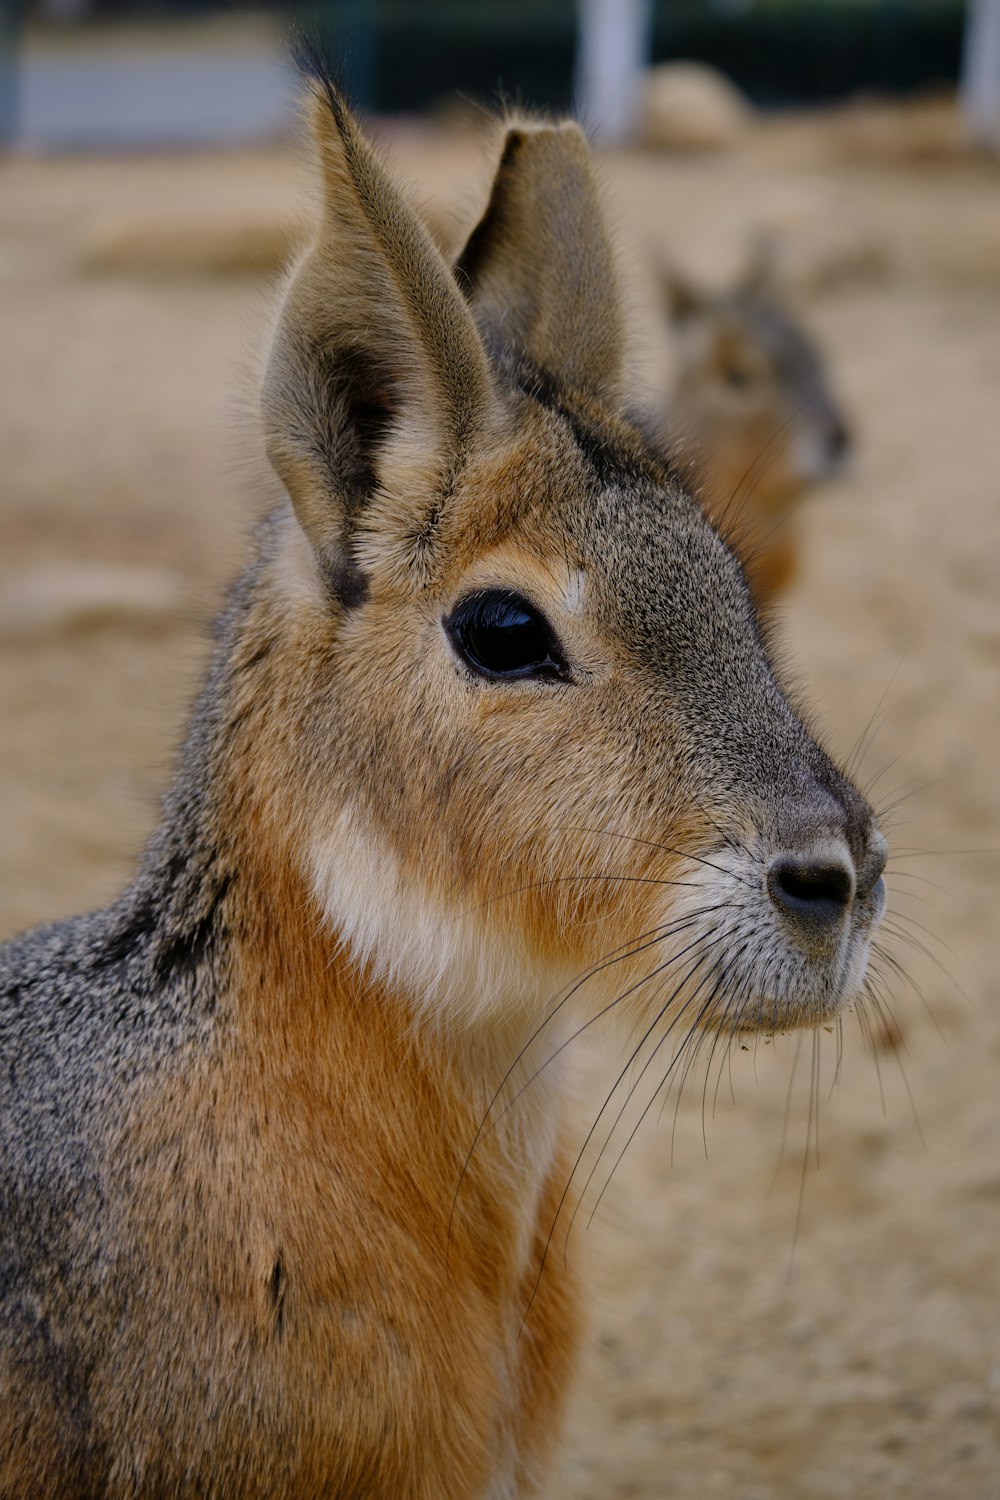 a close up of a small animal with a blurry background